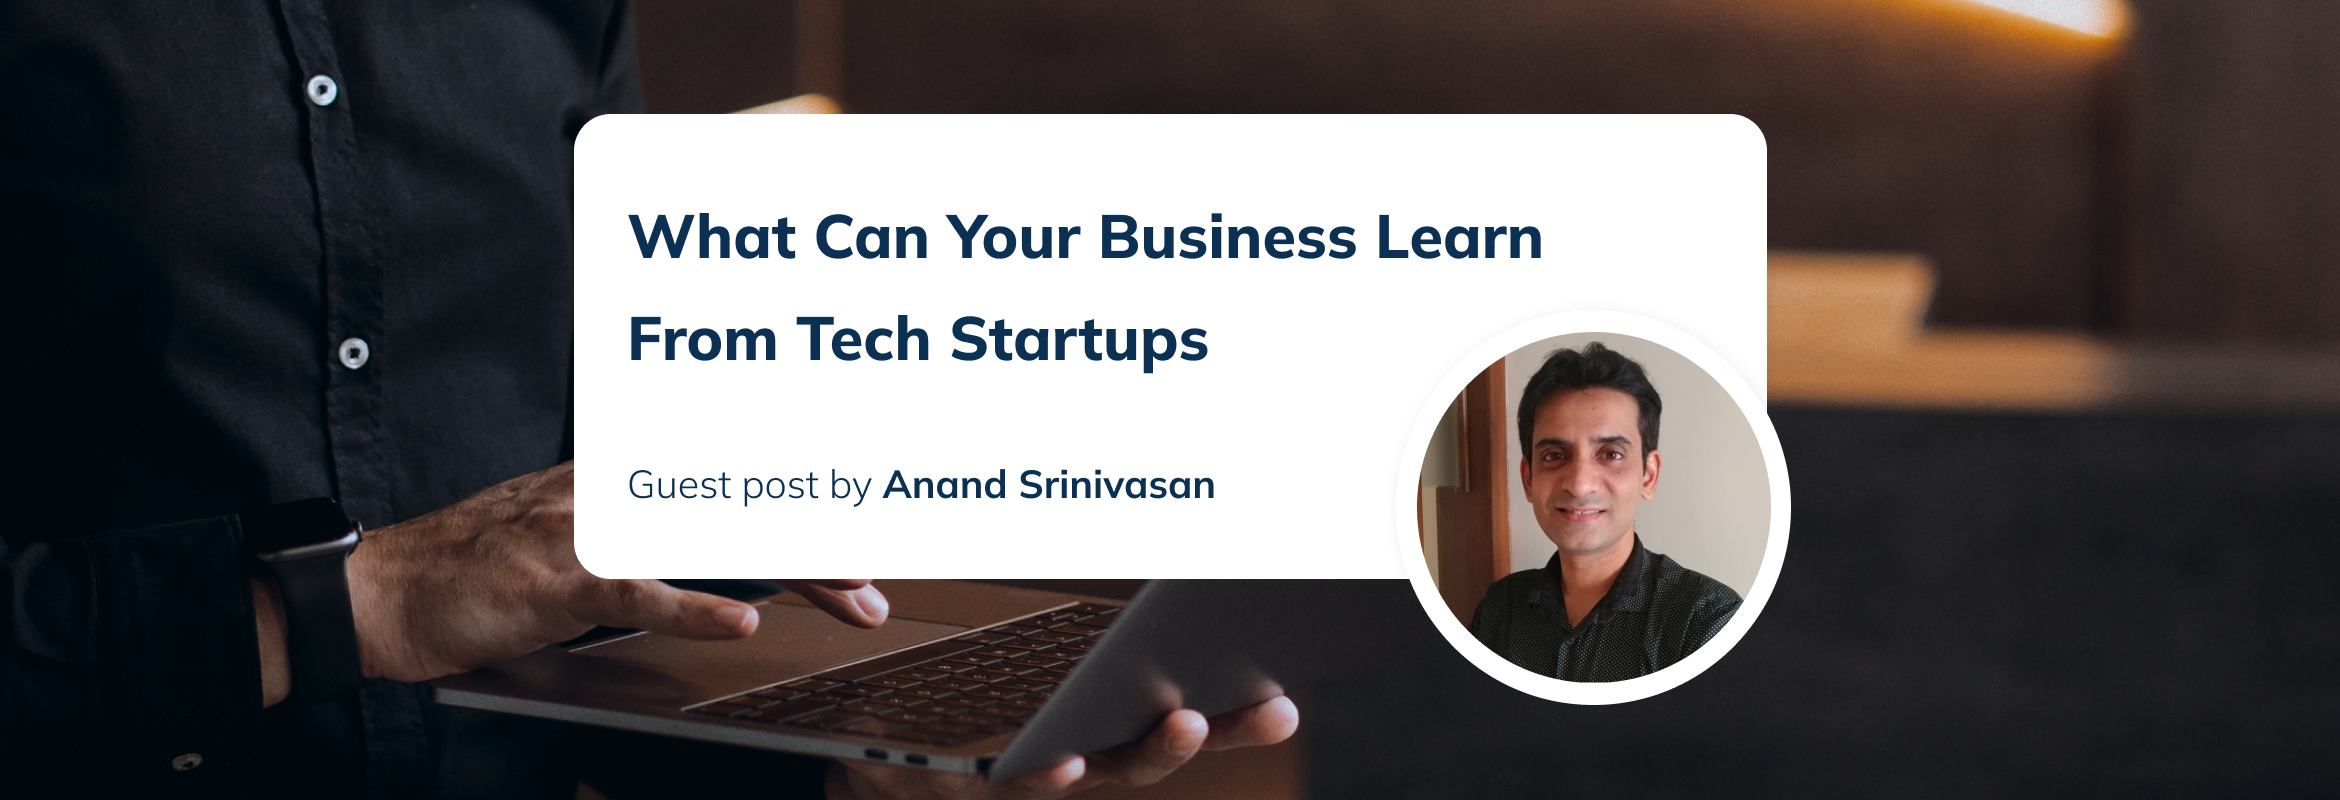 What can your business learn from tech start-ups